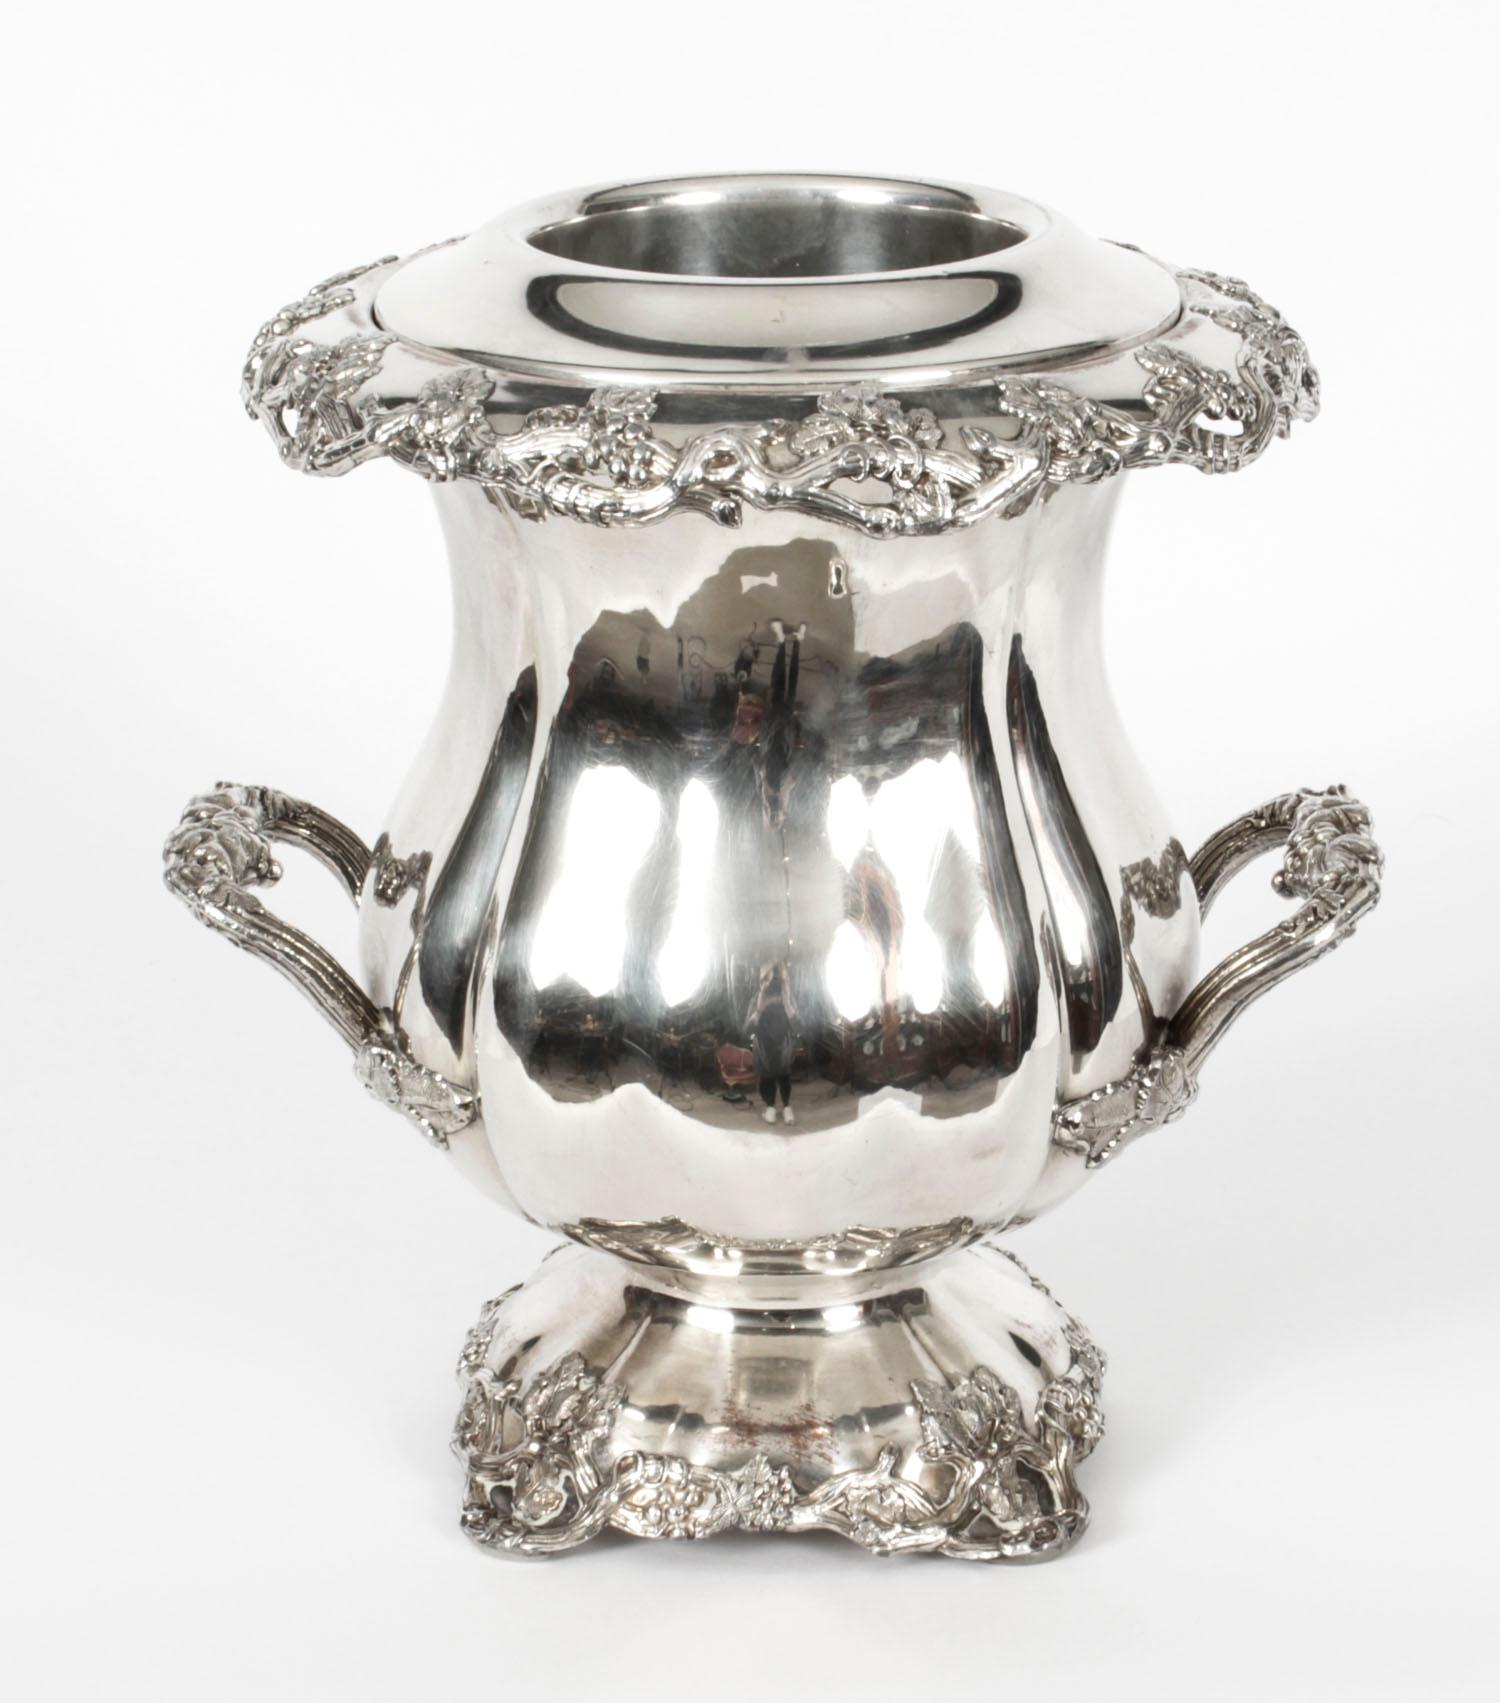 This is an exceptional pair of antique French  Silver Plated on copper wine coolers bearing the mark of the renowned silversmith / plaqueur, GD, circa 1830 in date.
 
The wine coolers stand on a widespread circular pedestal bases and the bodies rims